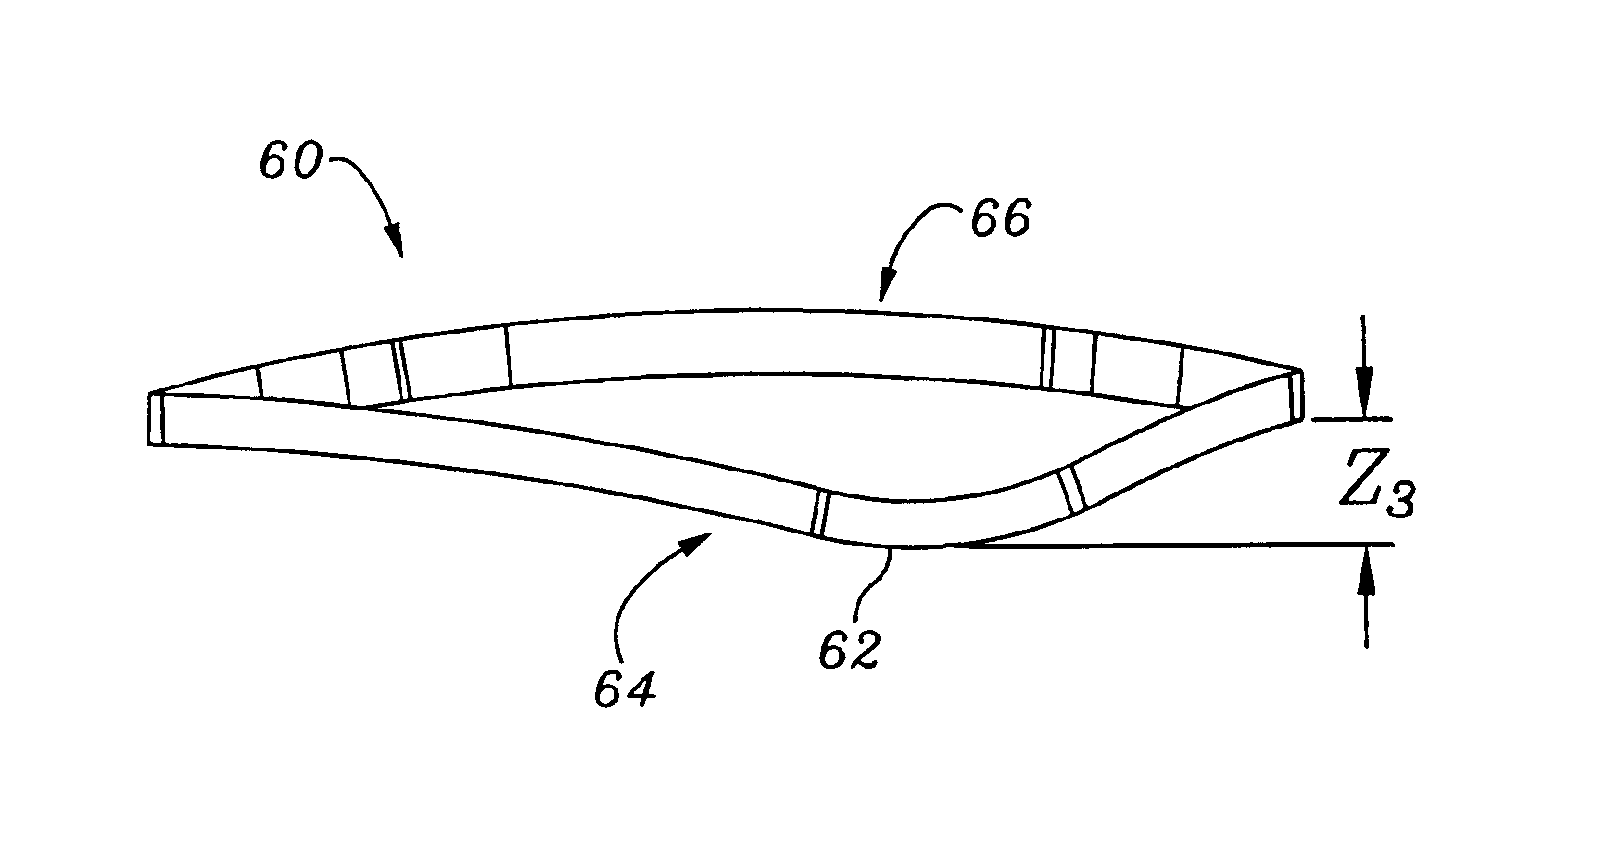 Mitral valve annuloplasty ring having a posterior bow